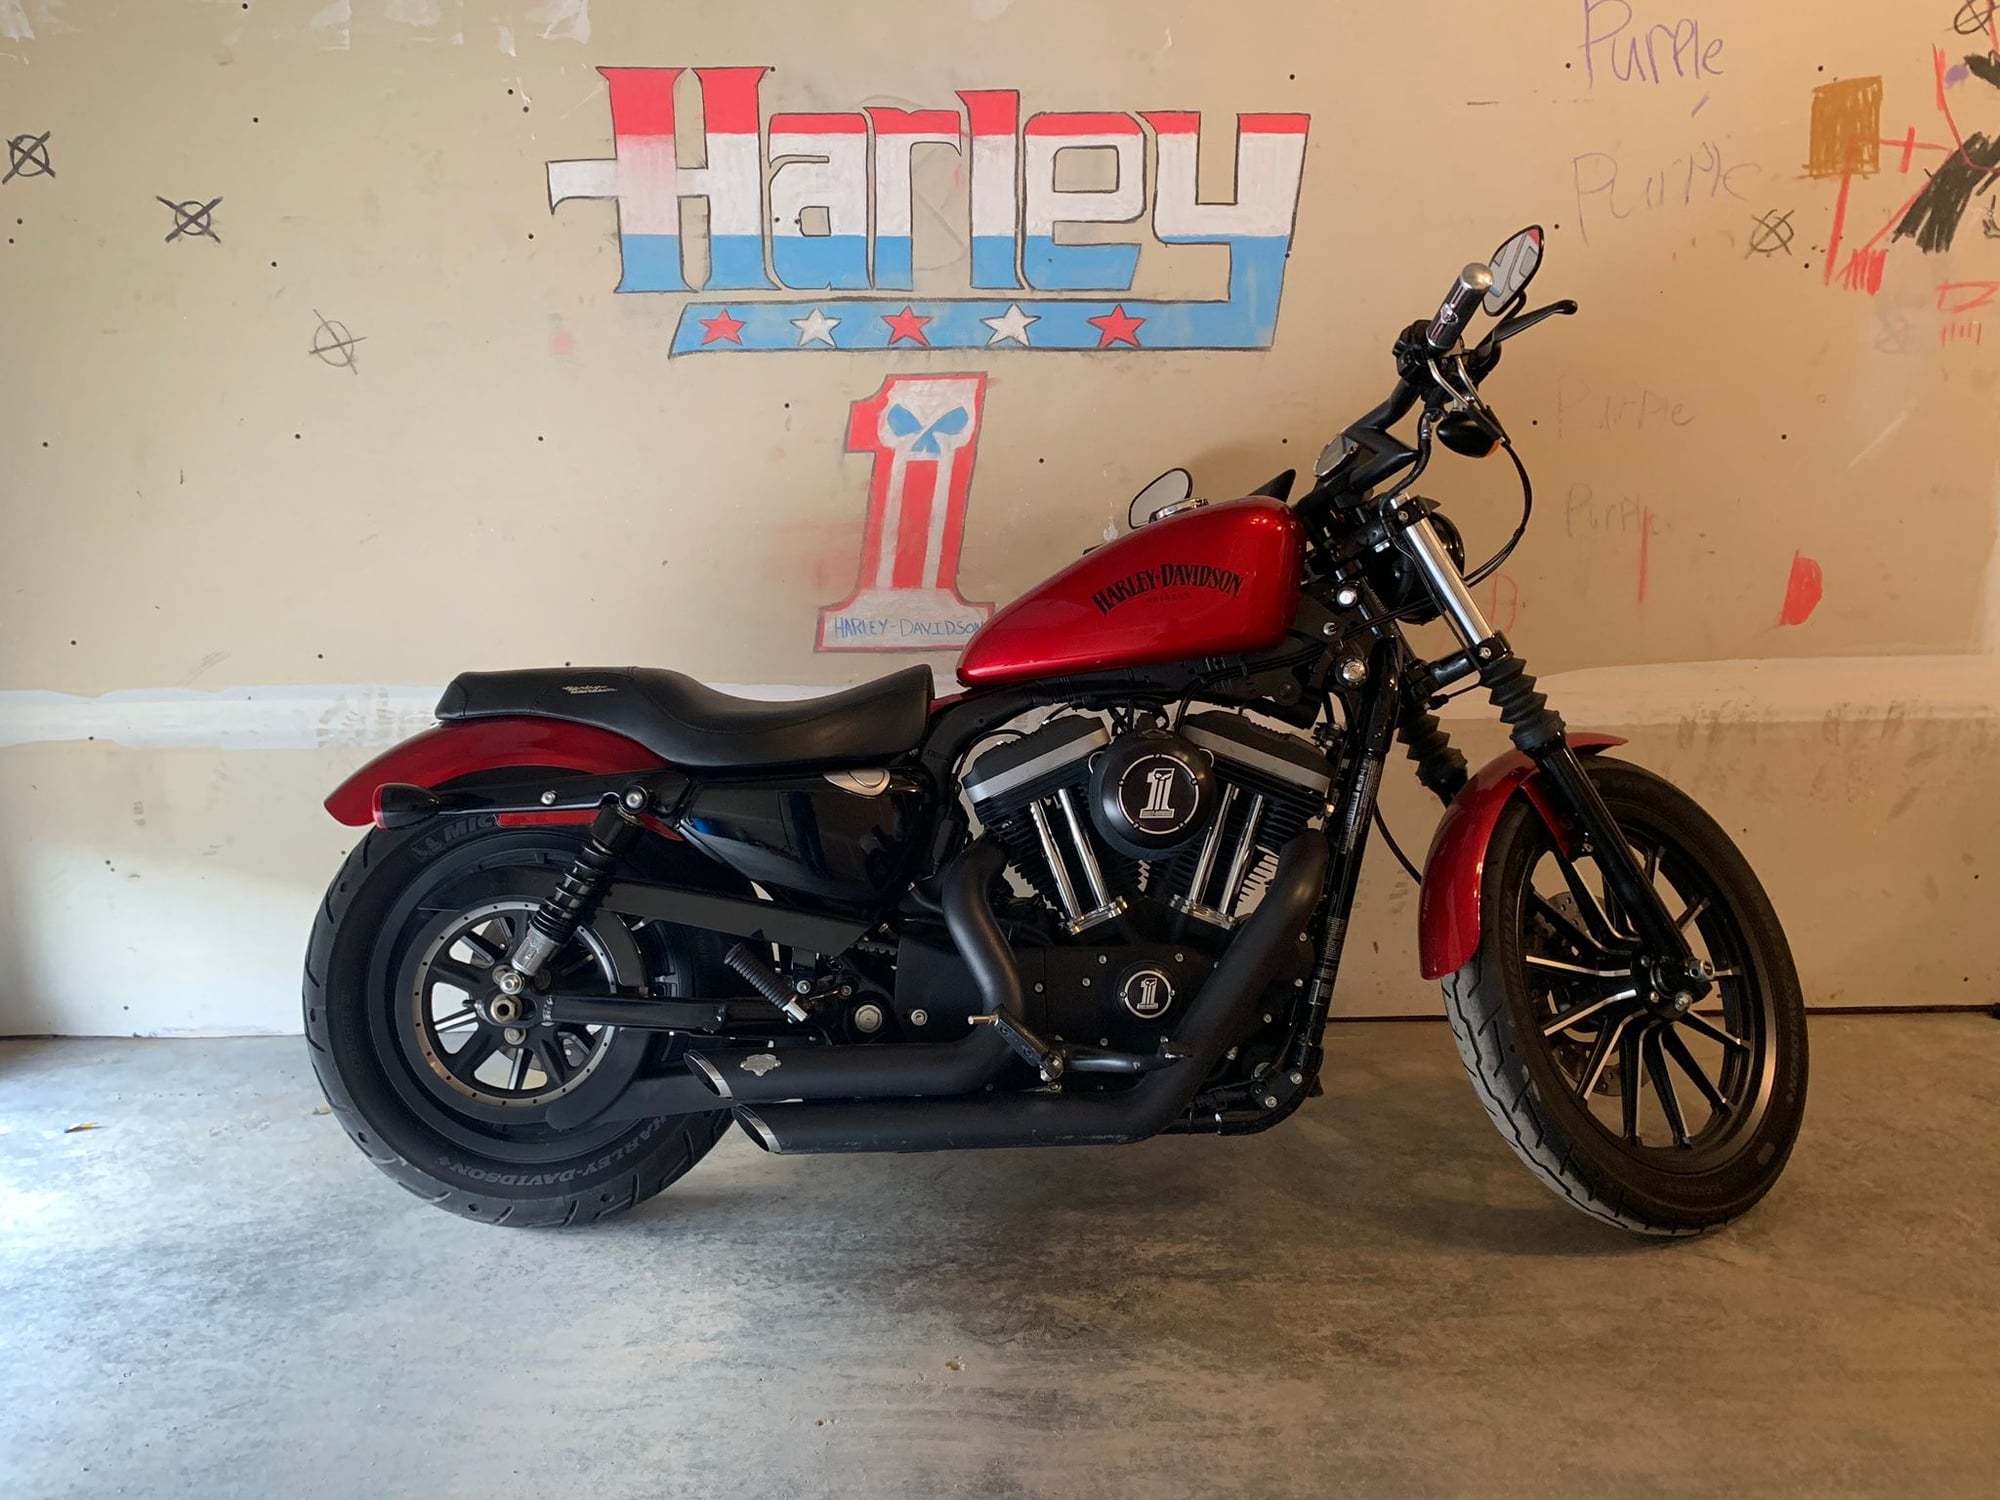 Iron 883 New Vs Used Reliability Cost Of Ownership Harley Davidson Forums